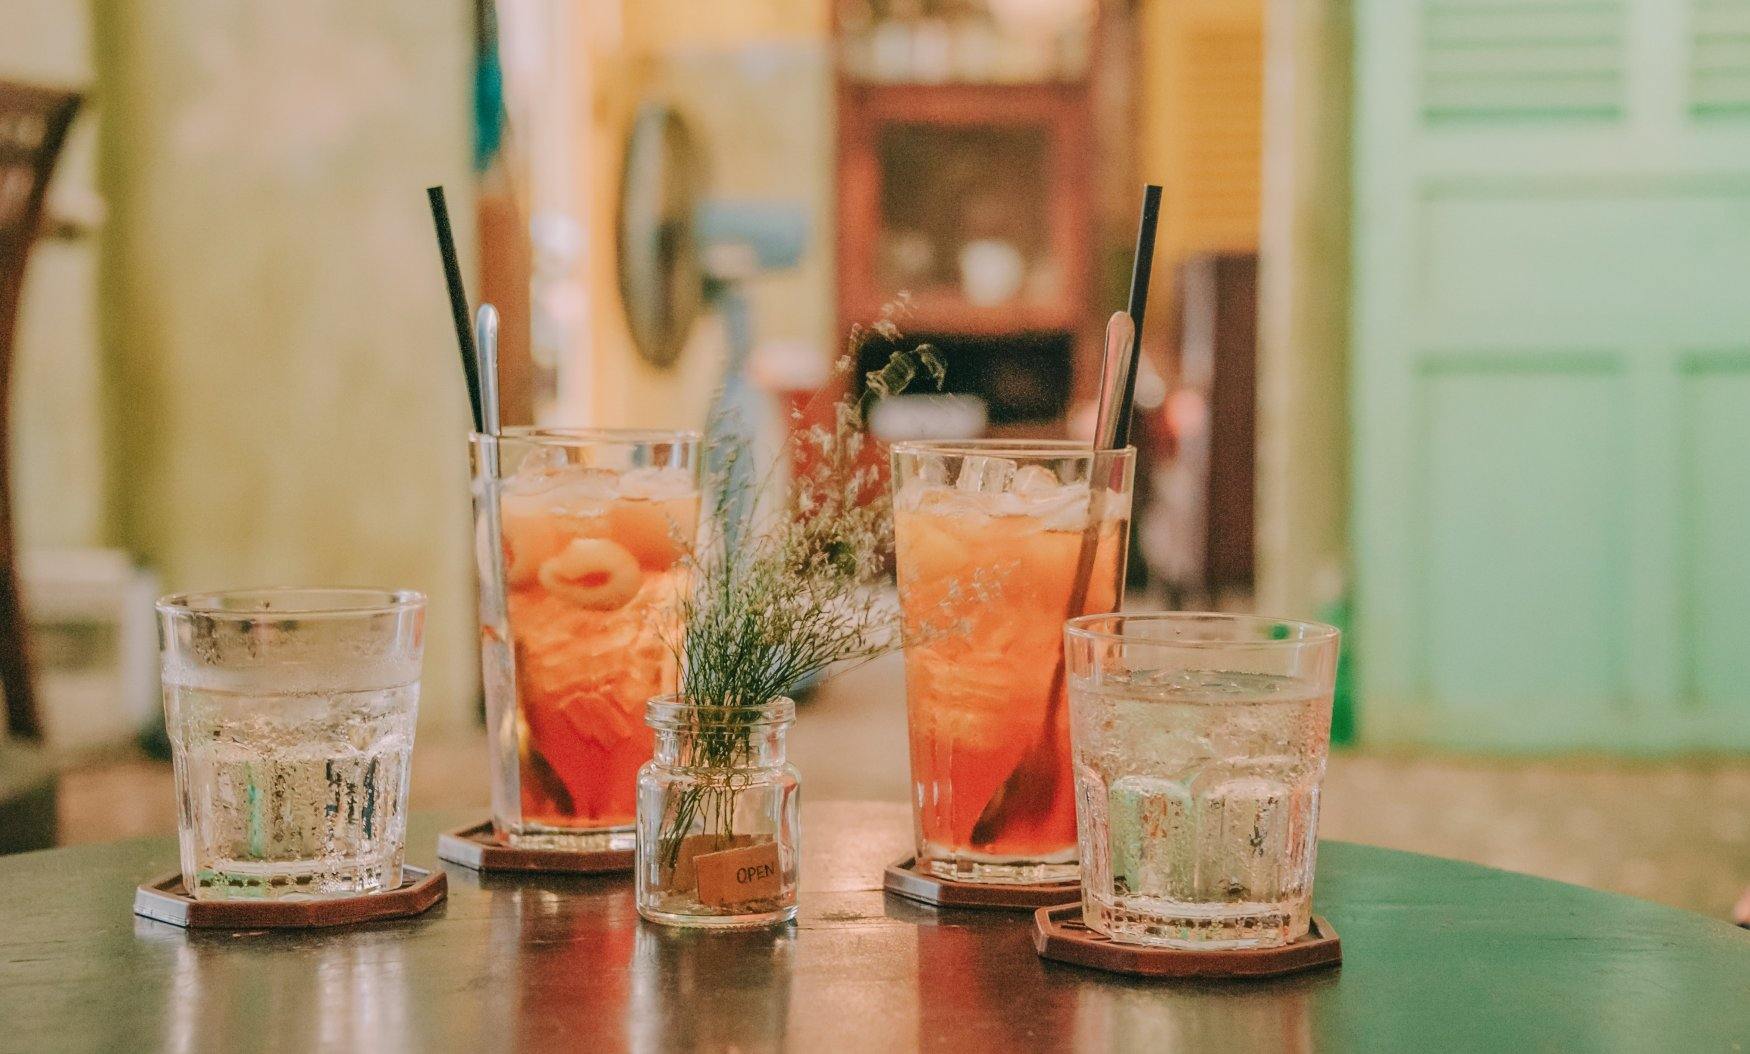 Where to Find Good Cocktails in Quebec City?